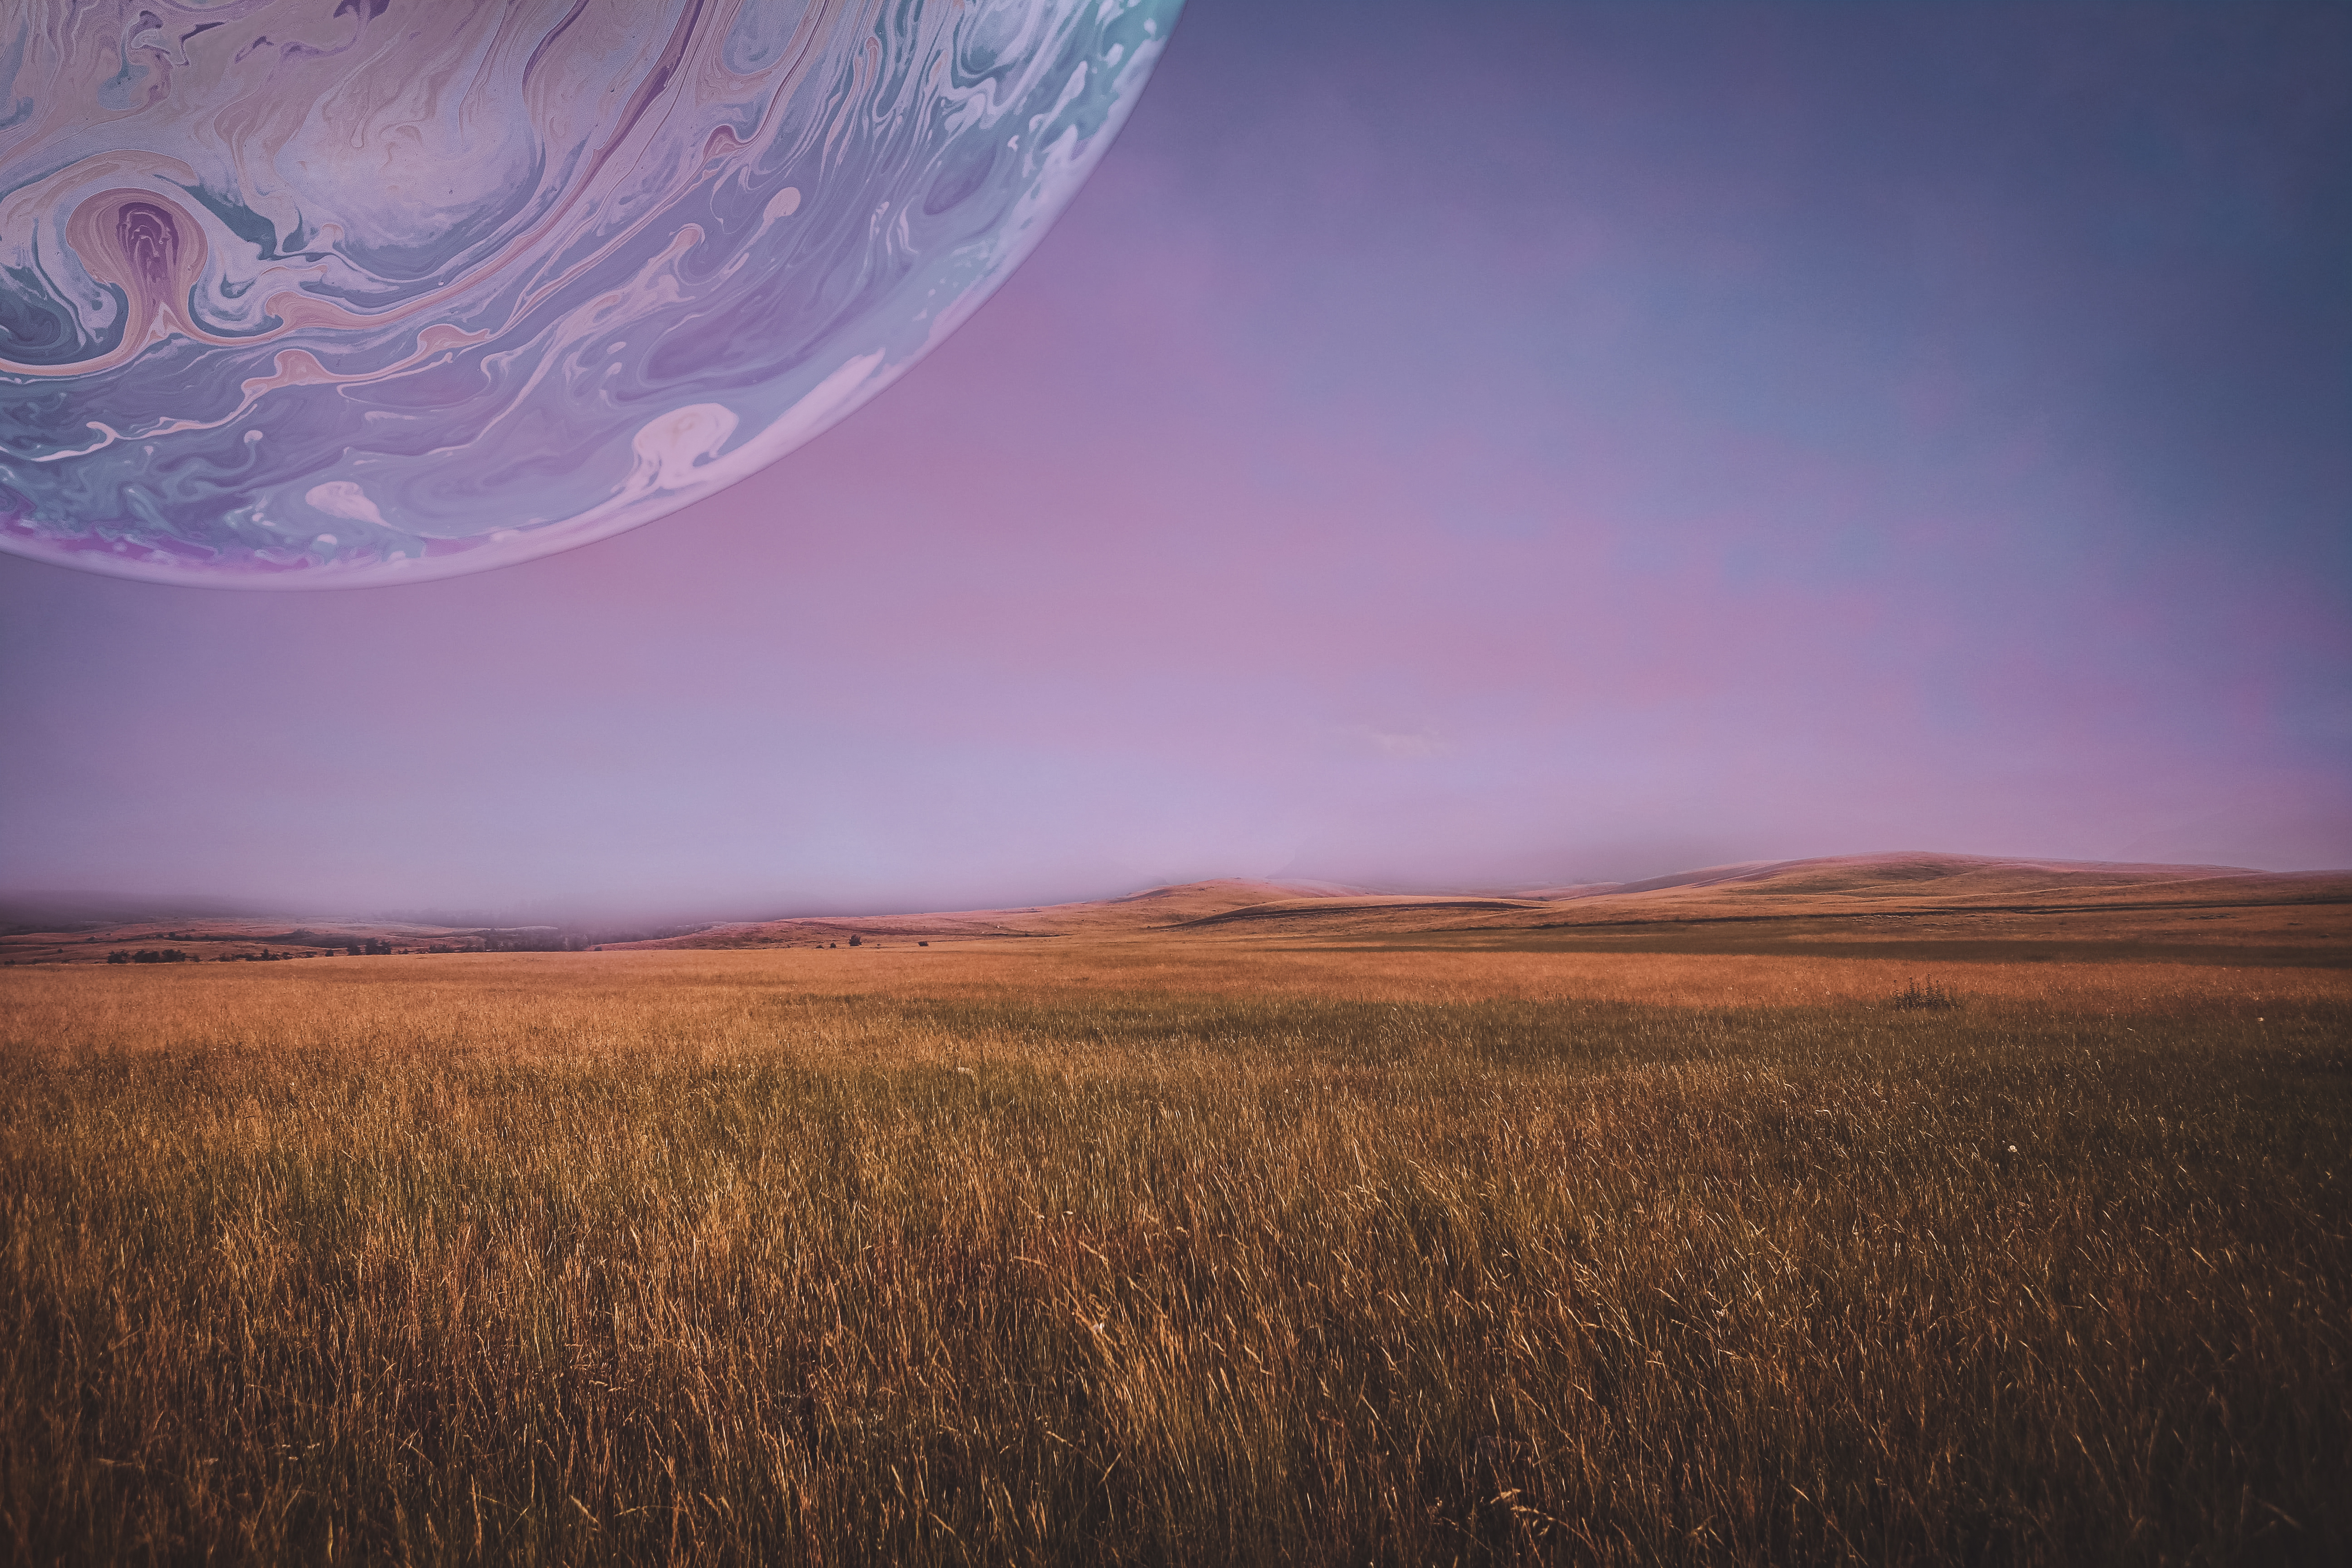 A majestic landscape of grasslands with a big moon in the sky that looks like a gas giant